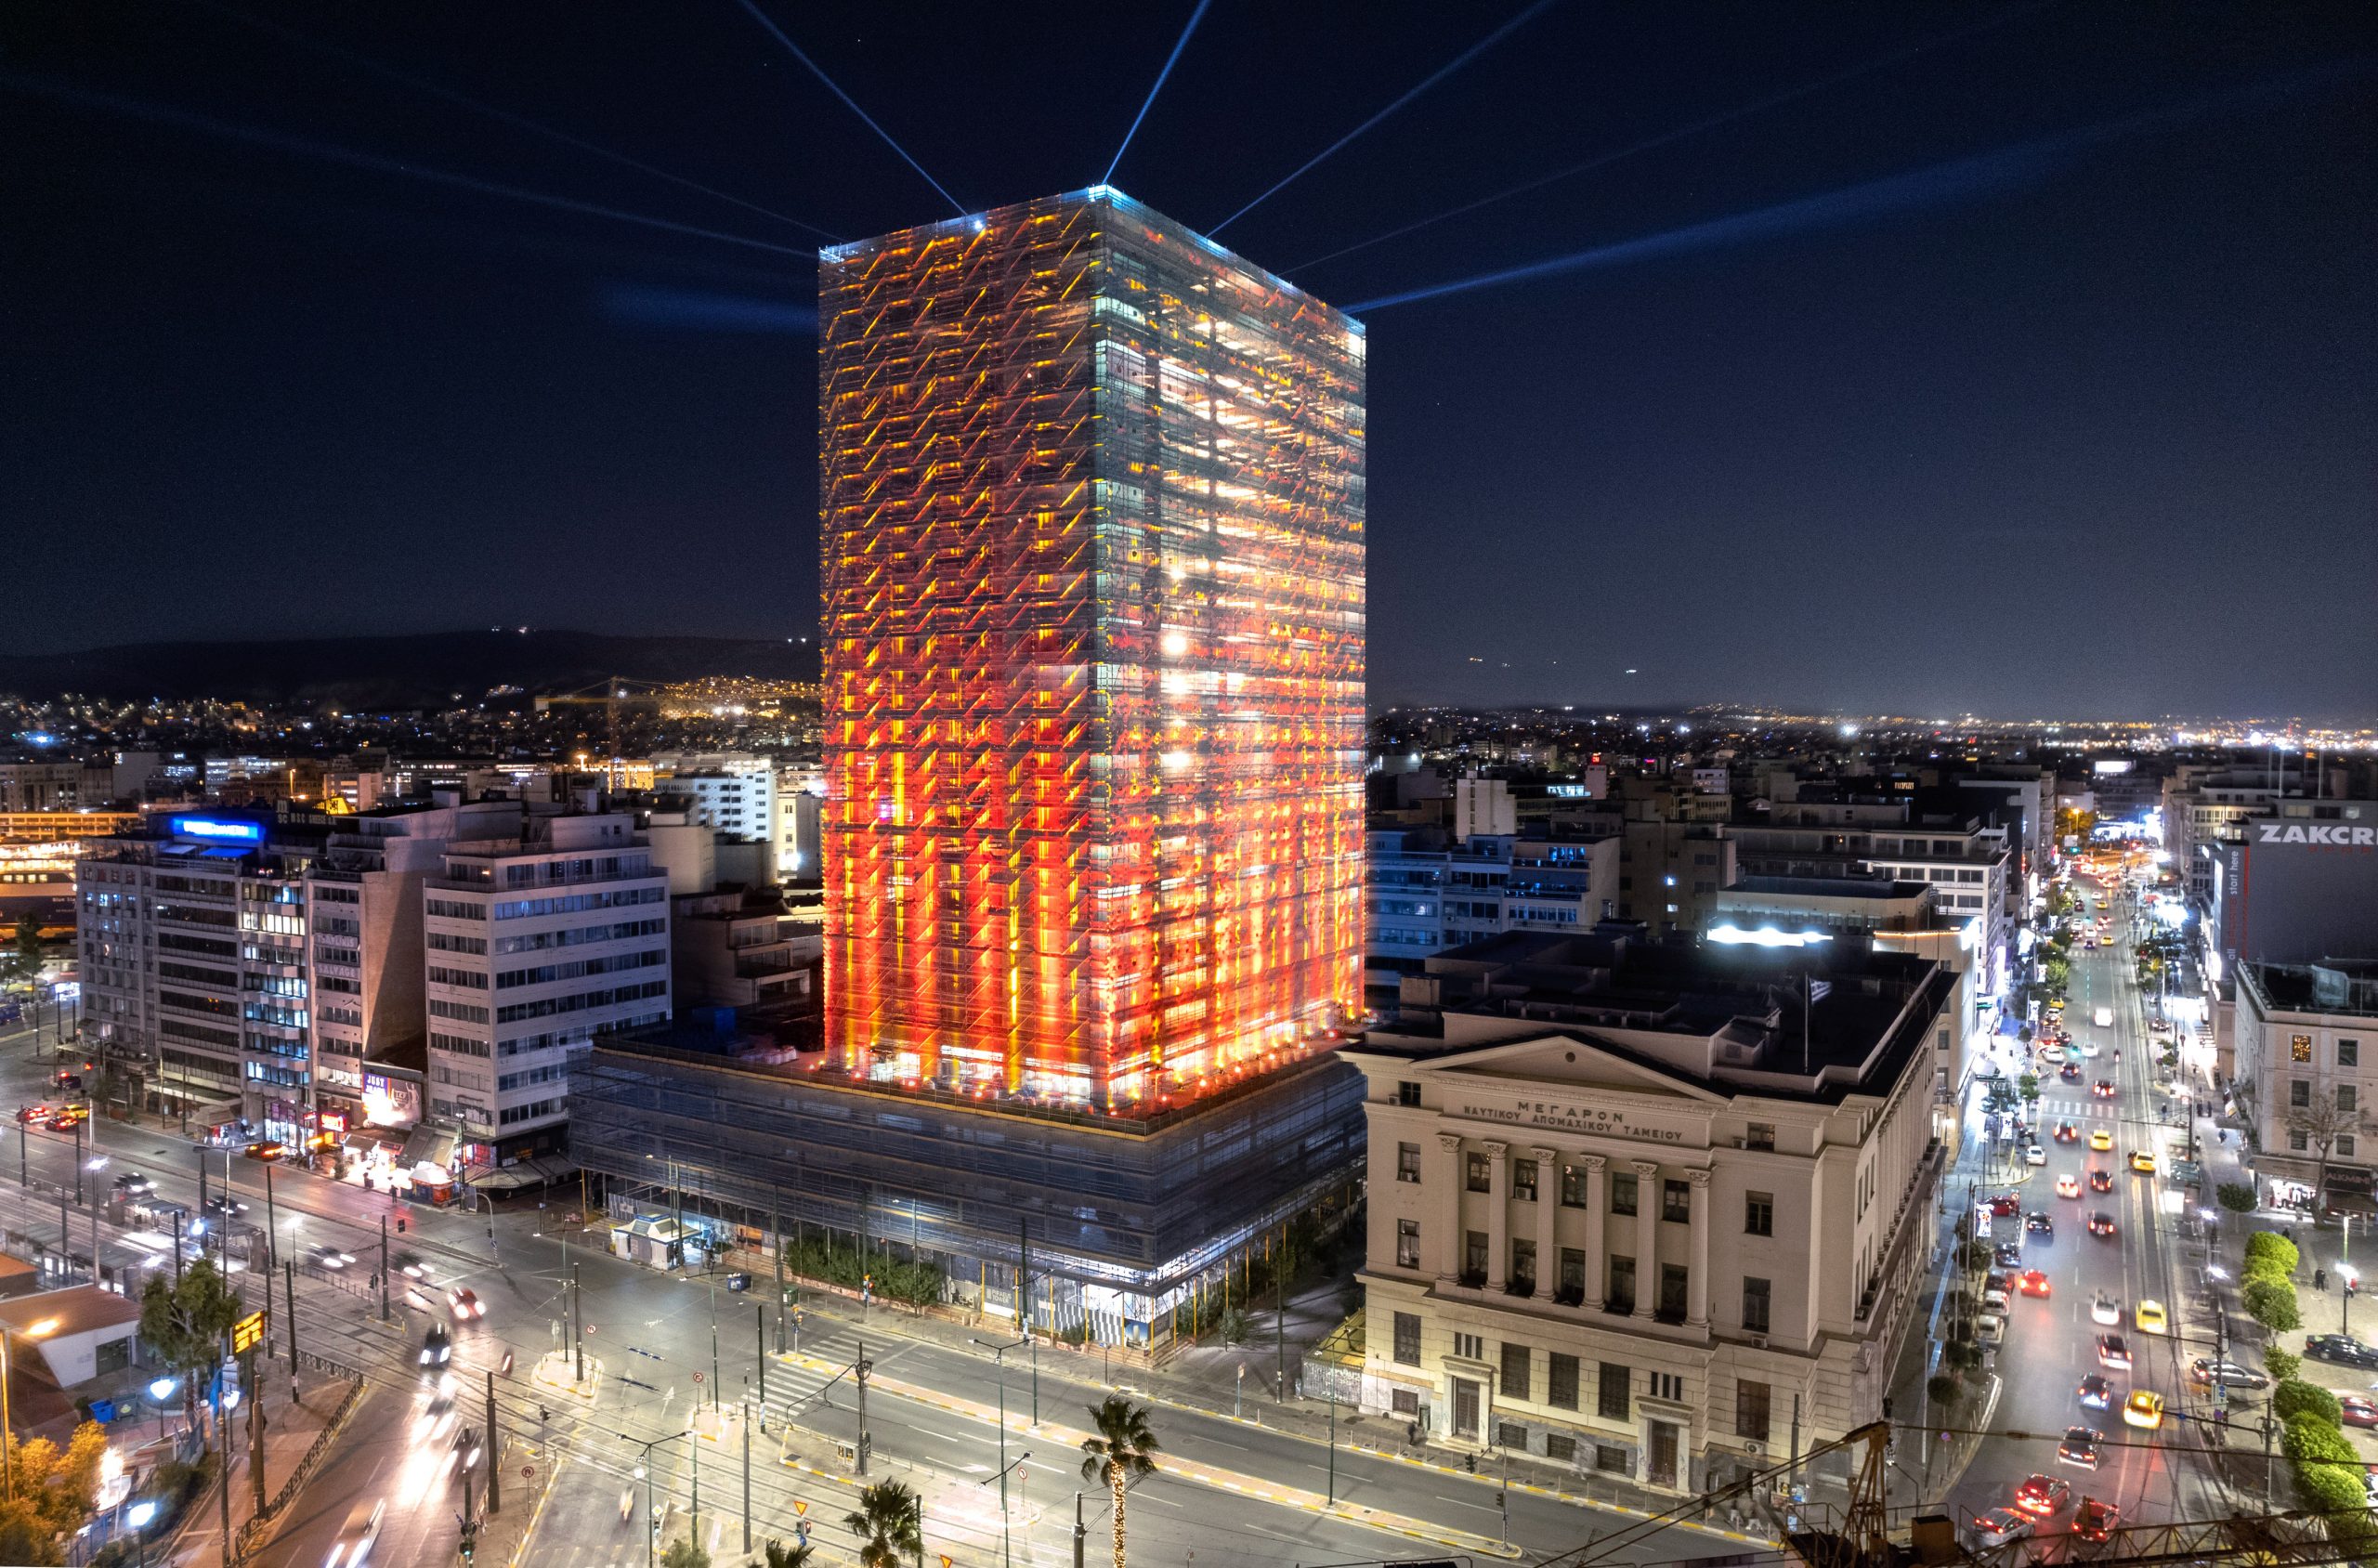 The Tower of Piraeus was illuminated creating a magical Christmas world